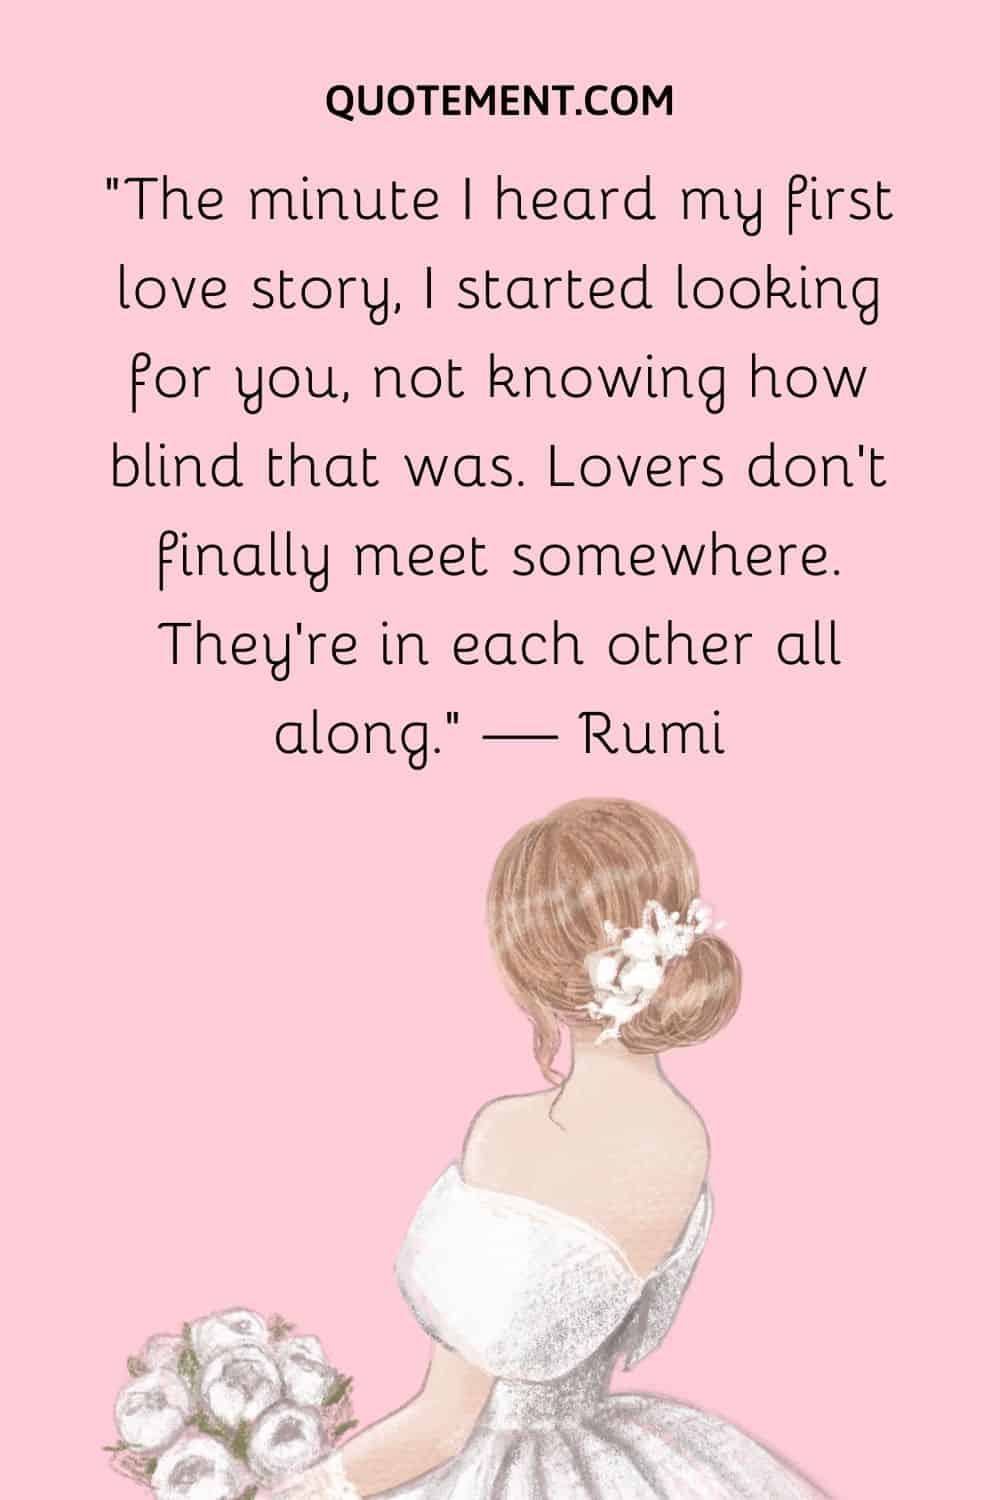 “The minute I heard my first love story, I started looking for you, not knowing how blind that was.